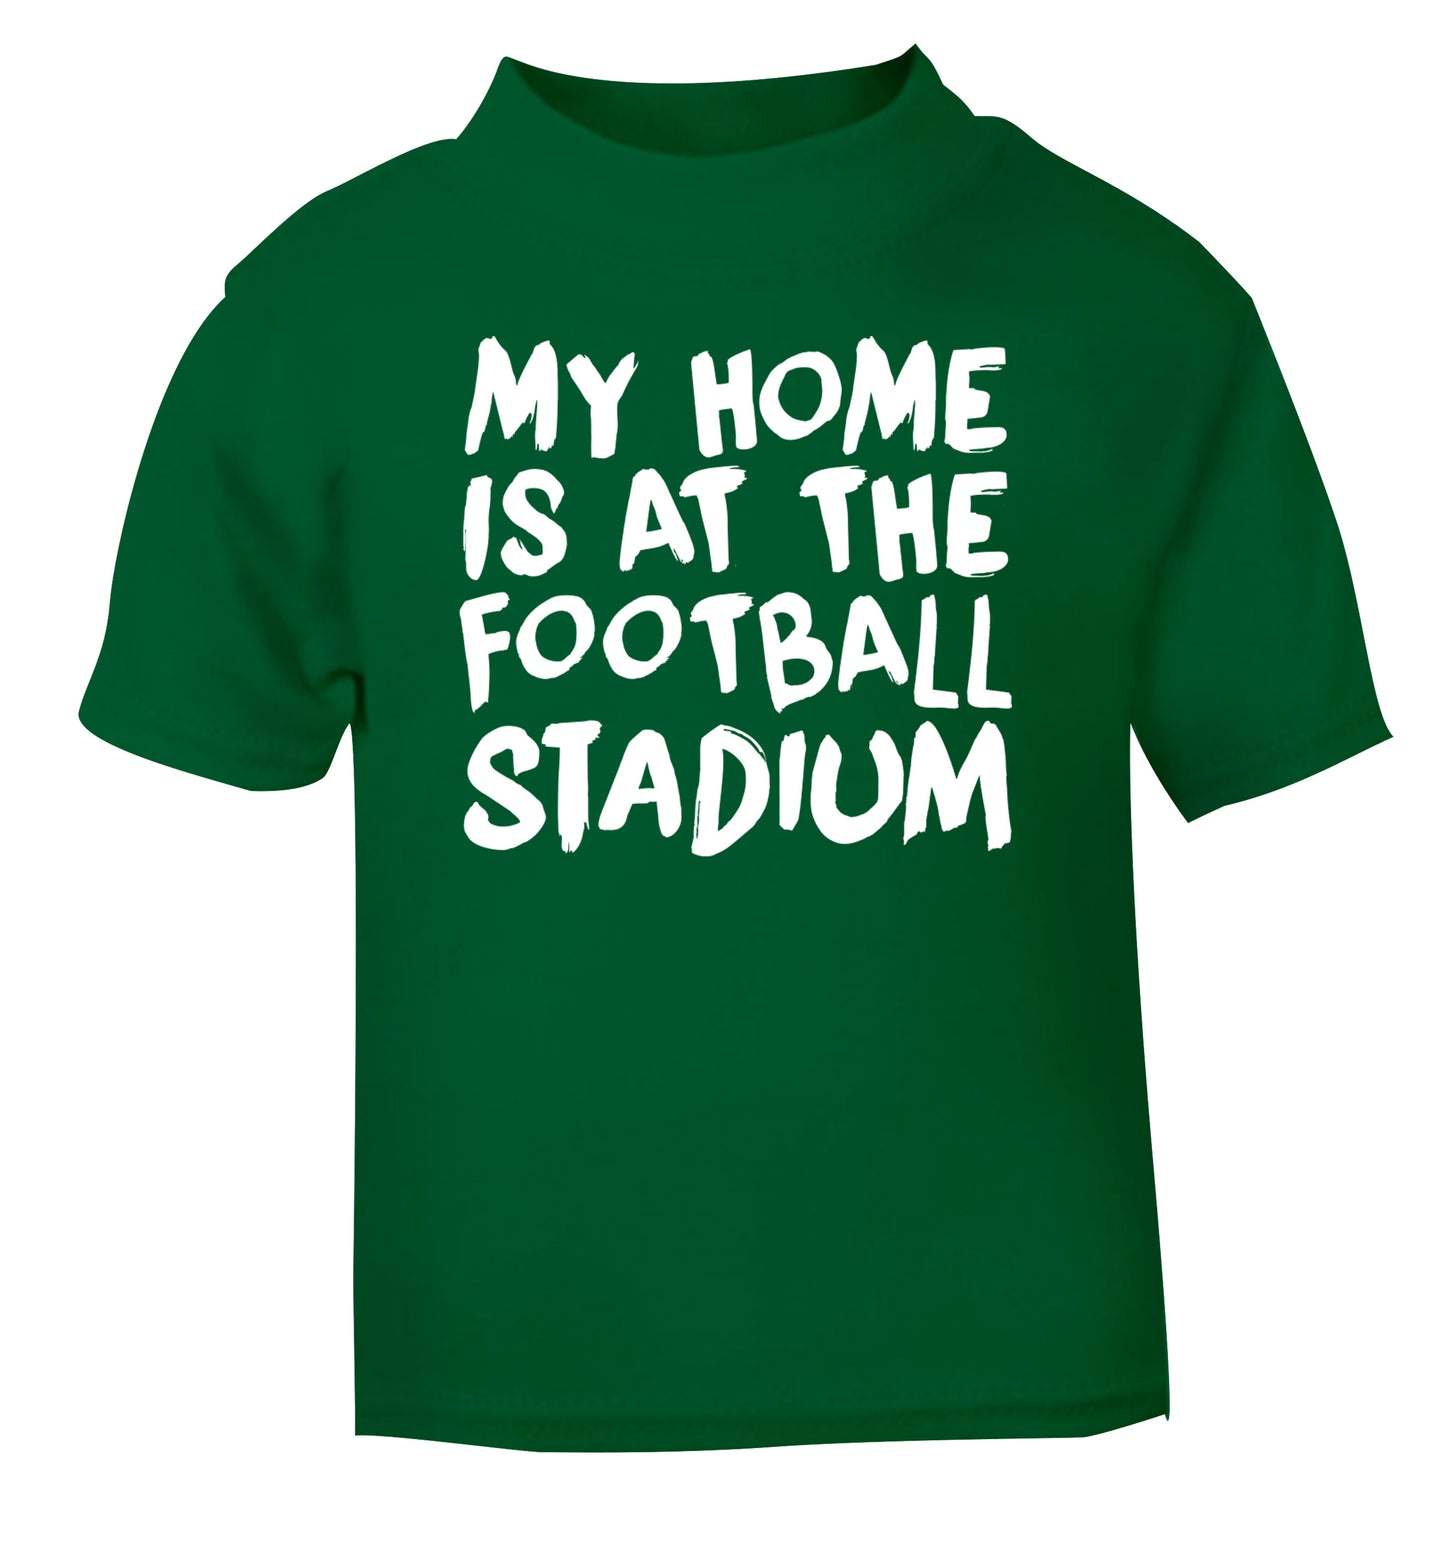 My home is at the football stadium green Baby Toddler Tshirt 2 Years